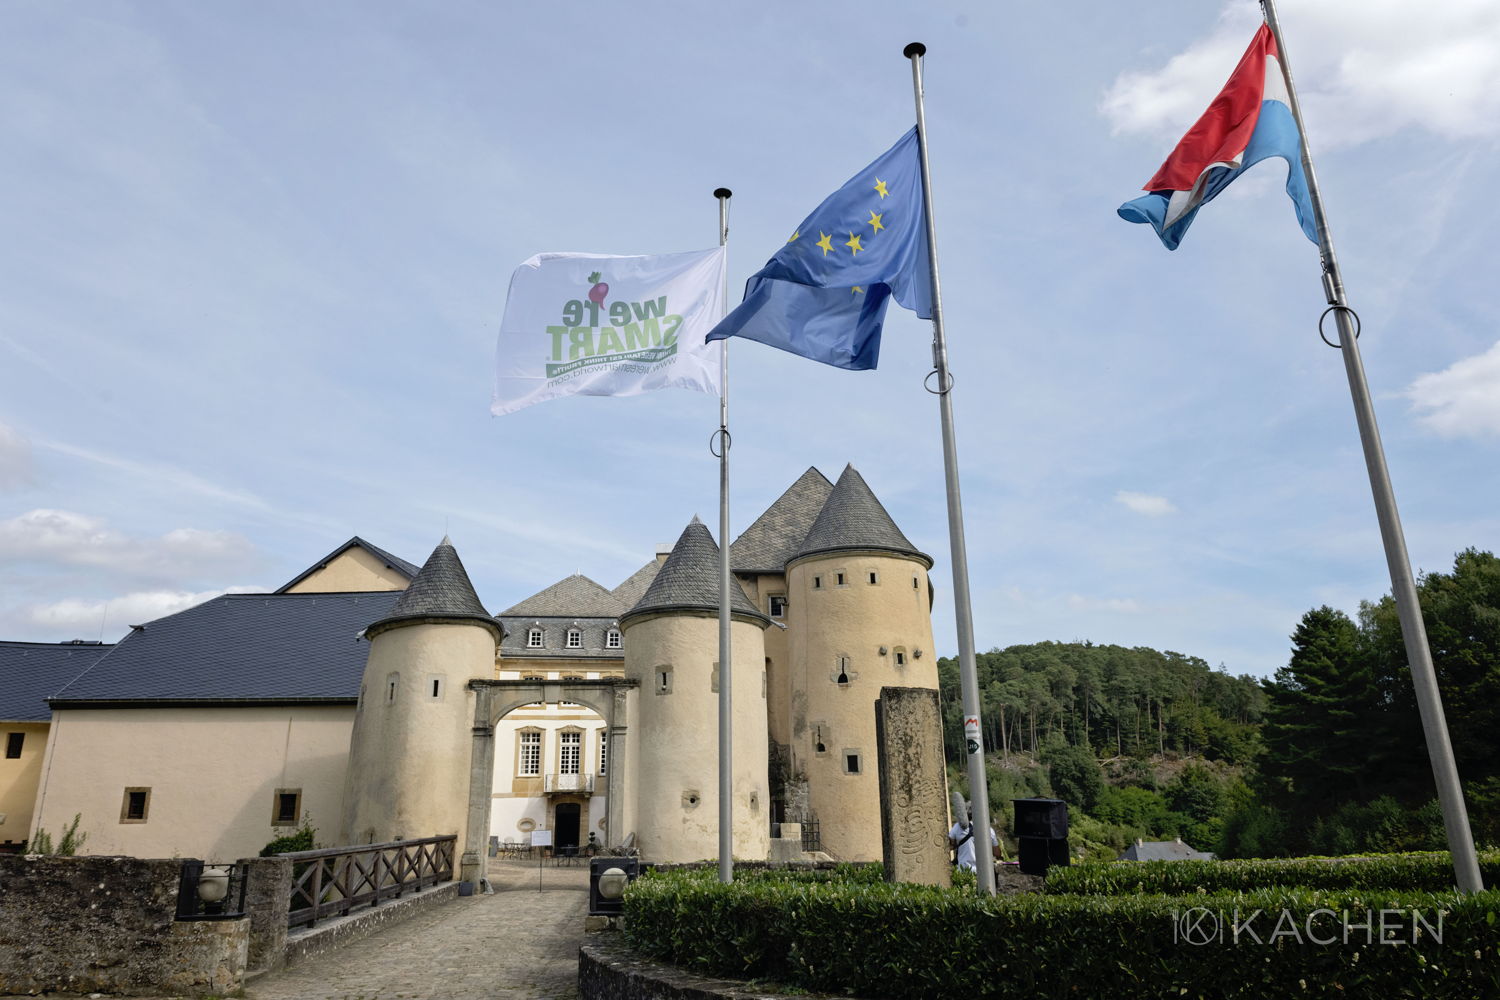 Château Bourglinster - location of the We're Smart Award show